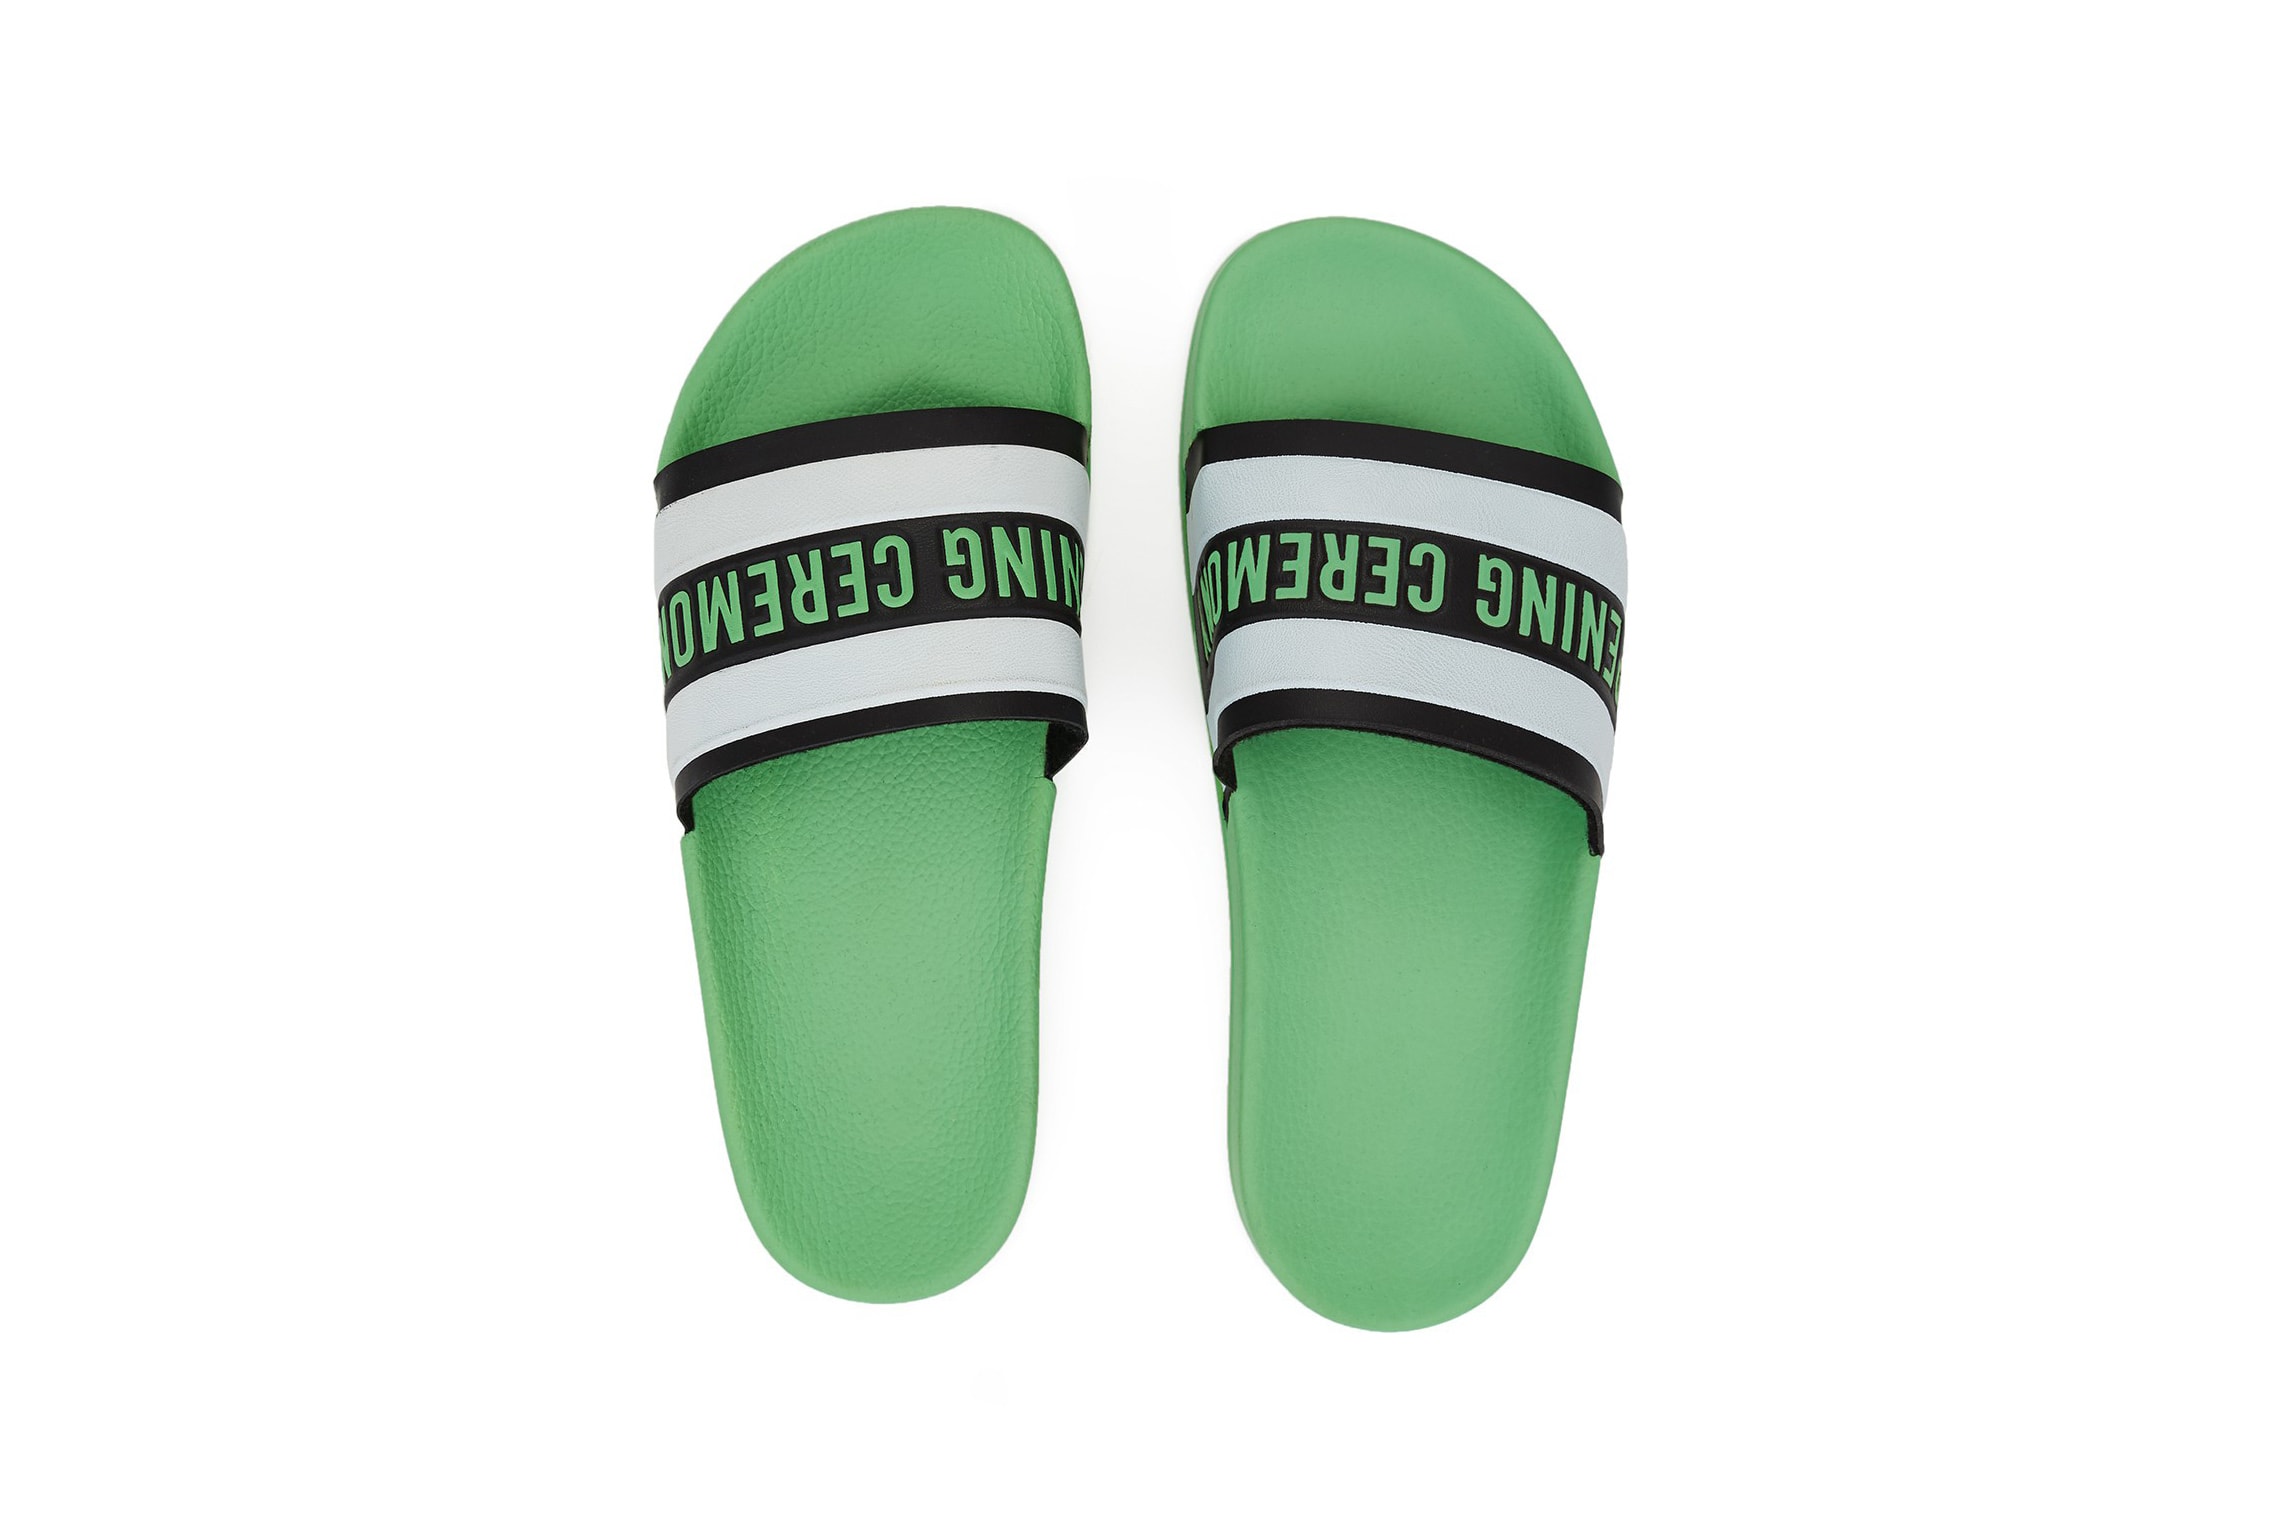 Opening Ceremony Colorful Rubber Slides Sandals Ace Green White Red Blue Black Strap Summer Spring Shoe